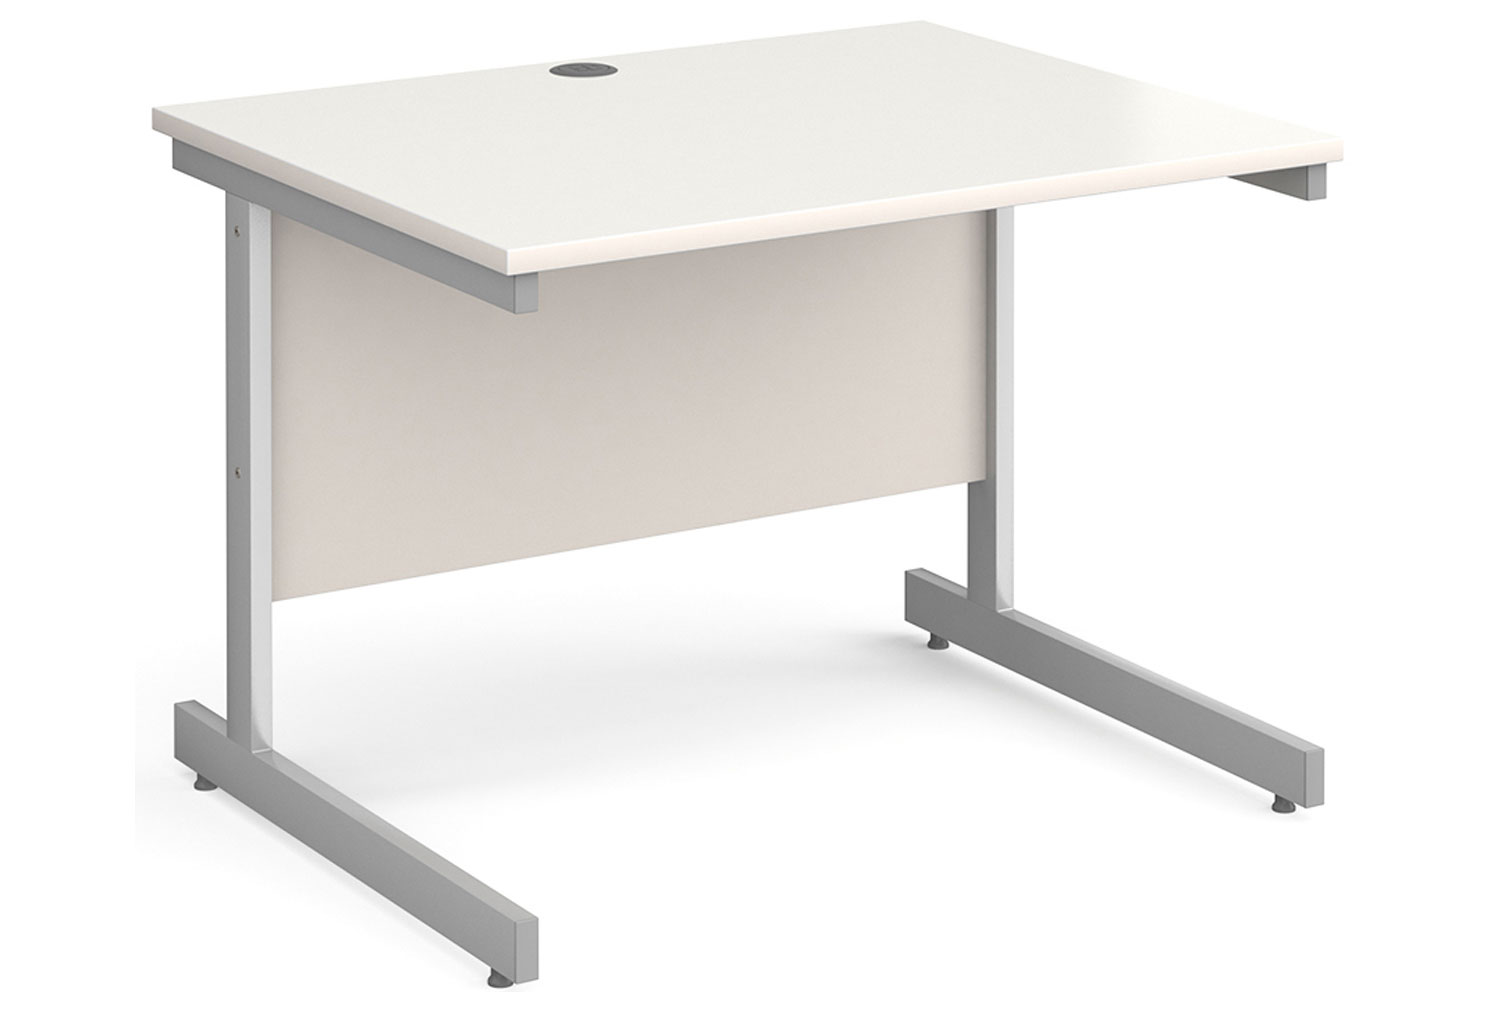 Thrifty Next-Day Rectangular Office Desk White, 100wx80dx73h (cm), Express Delivery